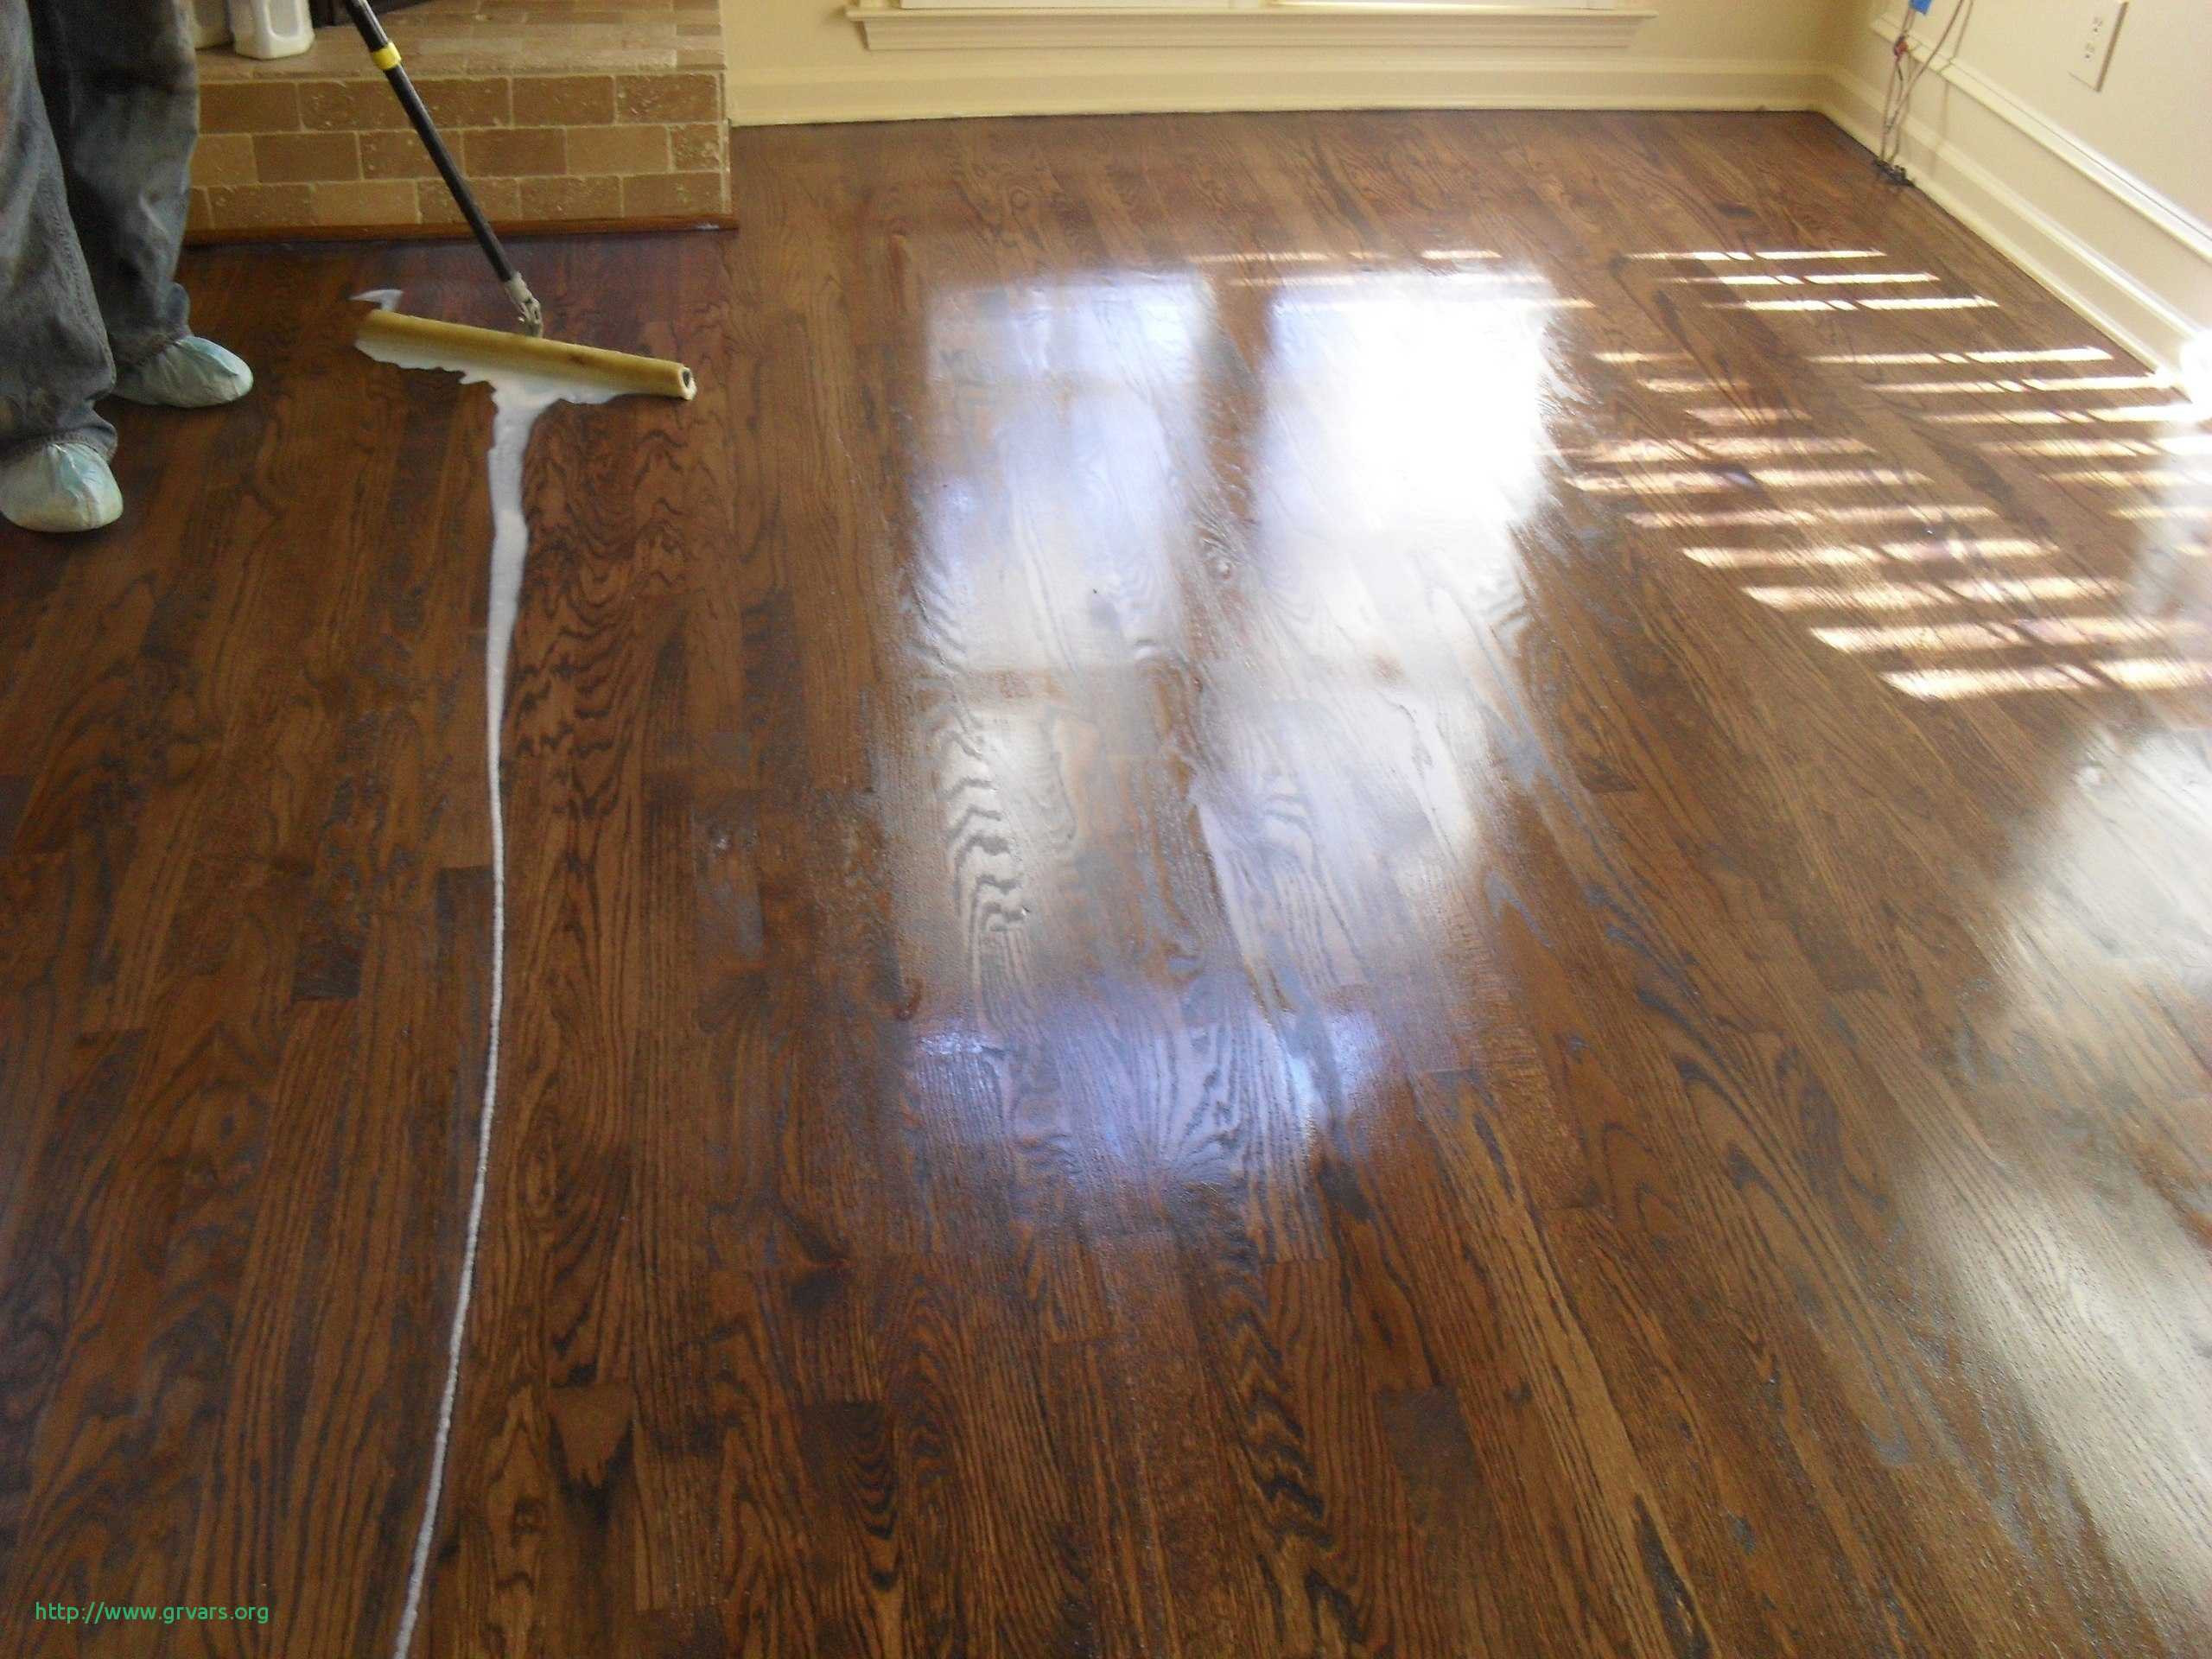 28 Trendy Dark Walnut Hardwood Floor Stain 2022 free download dark walnut hardwood floor stain of image number 6563 from post restoring old hardwood floors will pertaining to nouveau hardwood floors yourself ideas restoring old will inspirant redo with